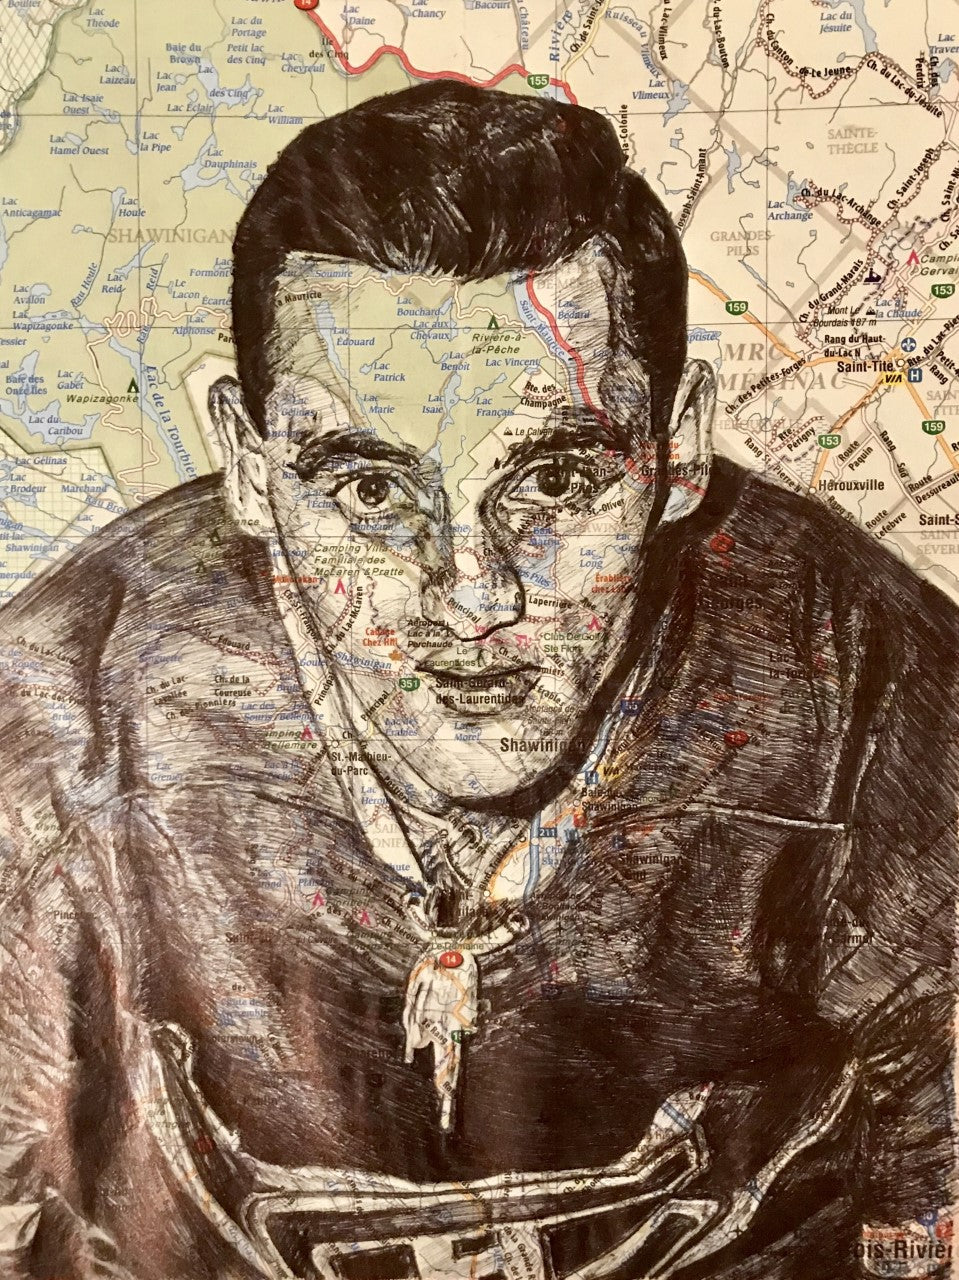 Original Pen and Ink Drawing on map - JACQUES PLANTE